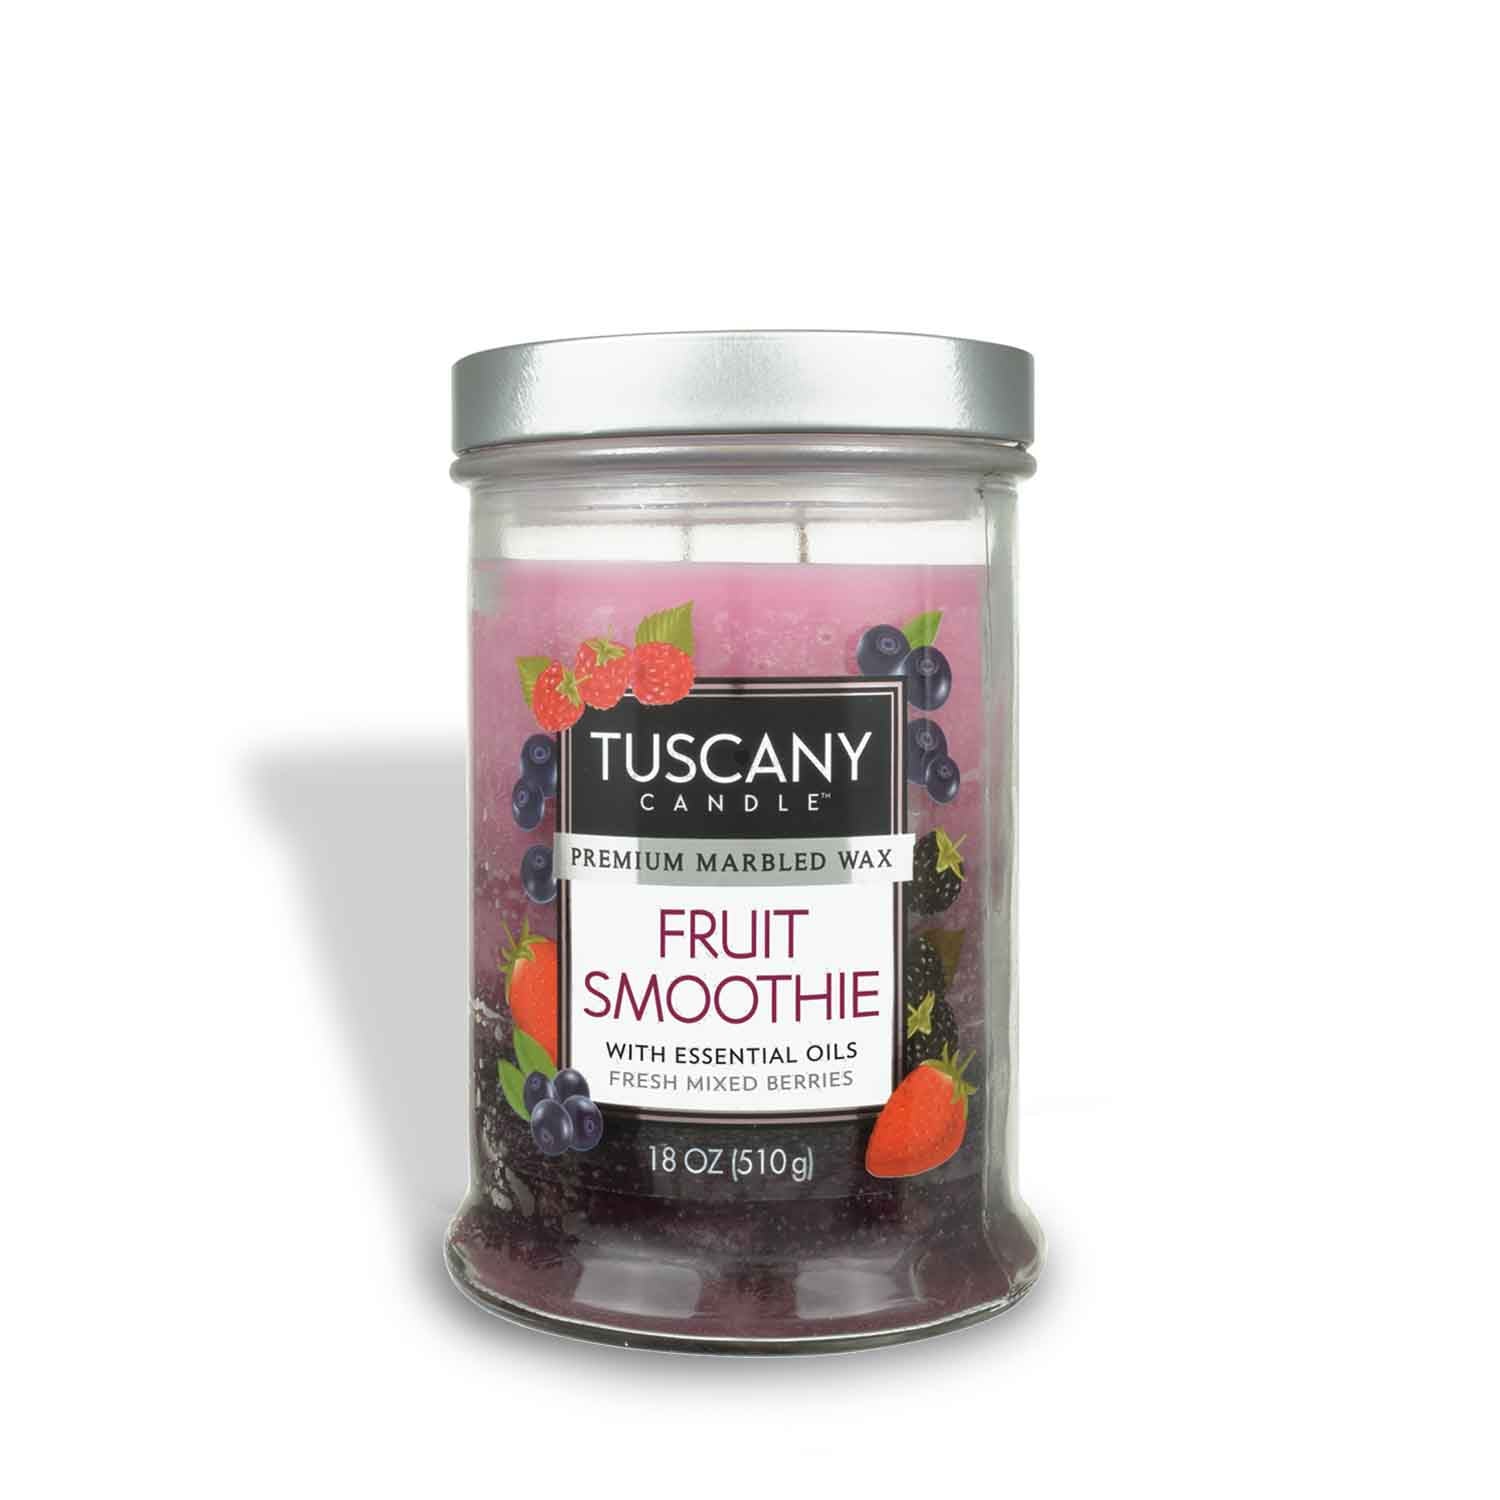 Fruit Smoothie Long-Lasting Scented Jar Candle (18 oz) by Tuscany Candle.